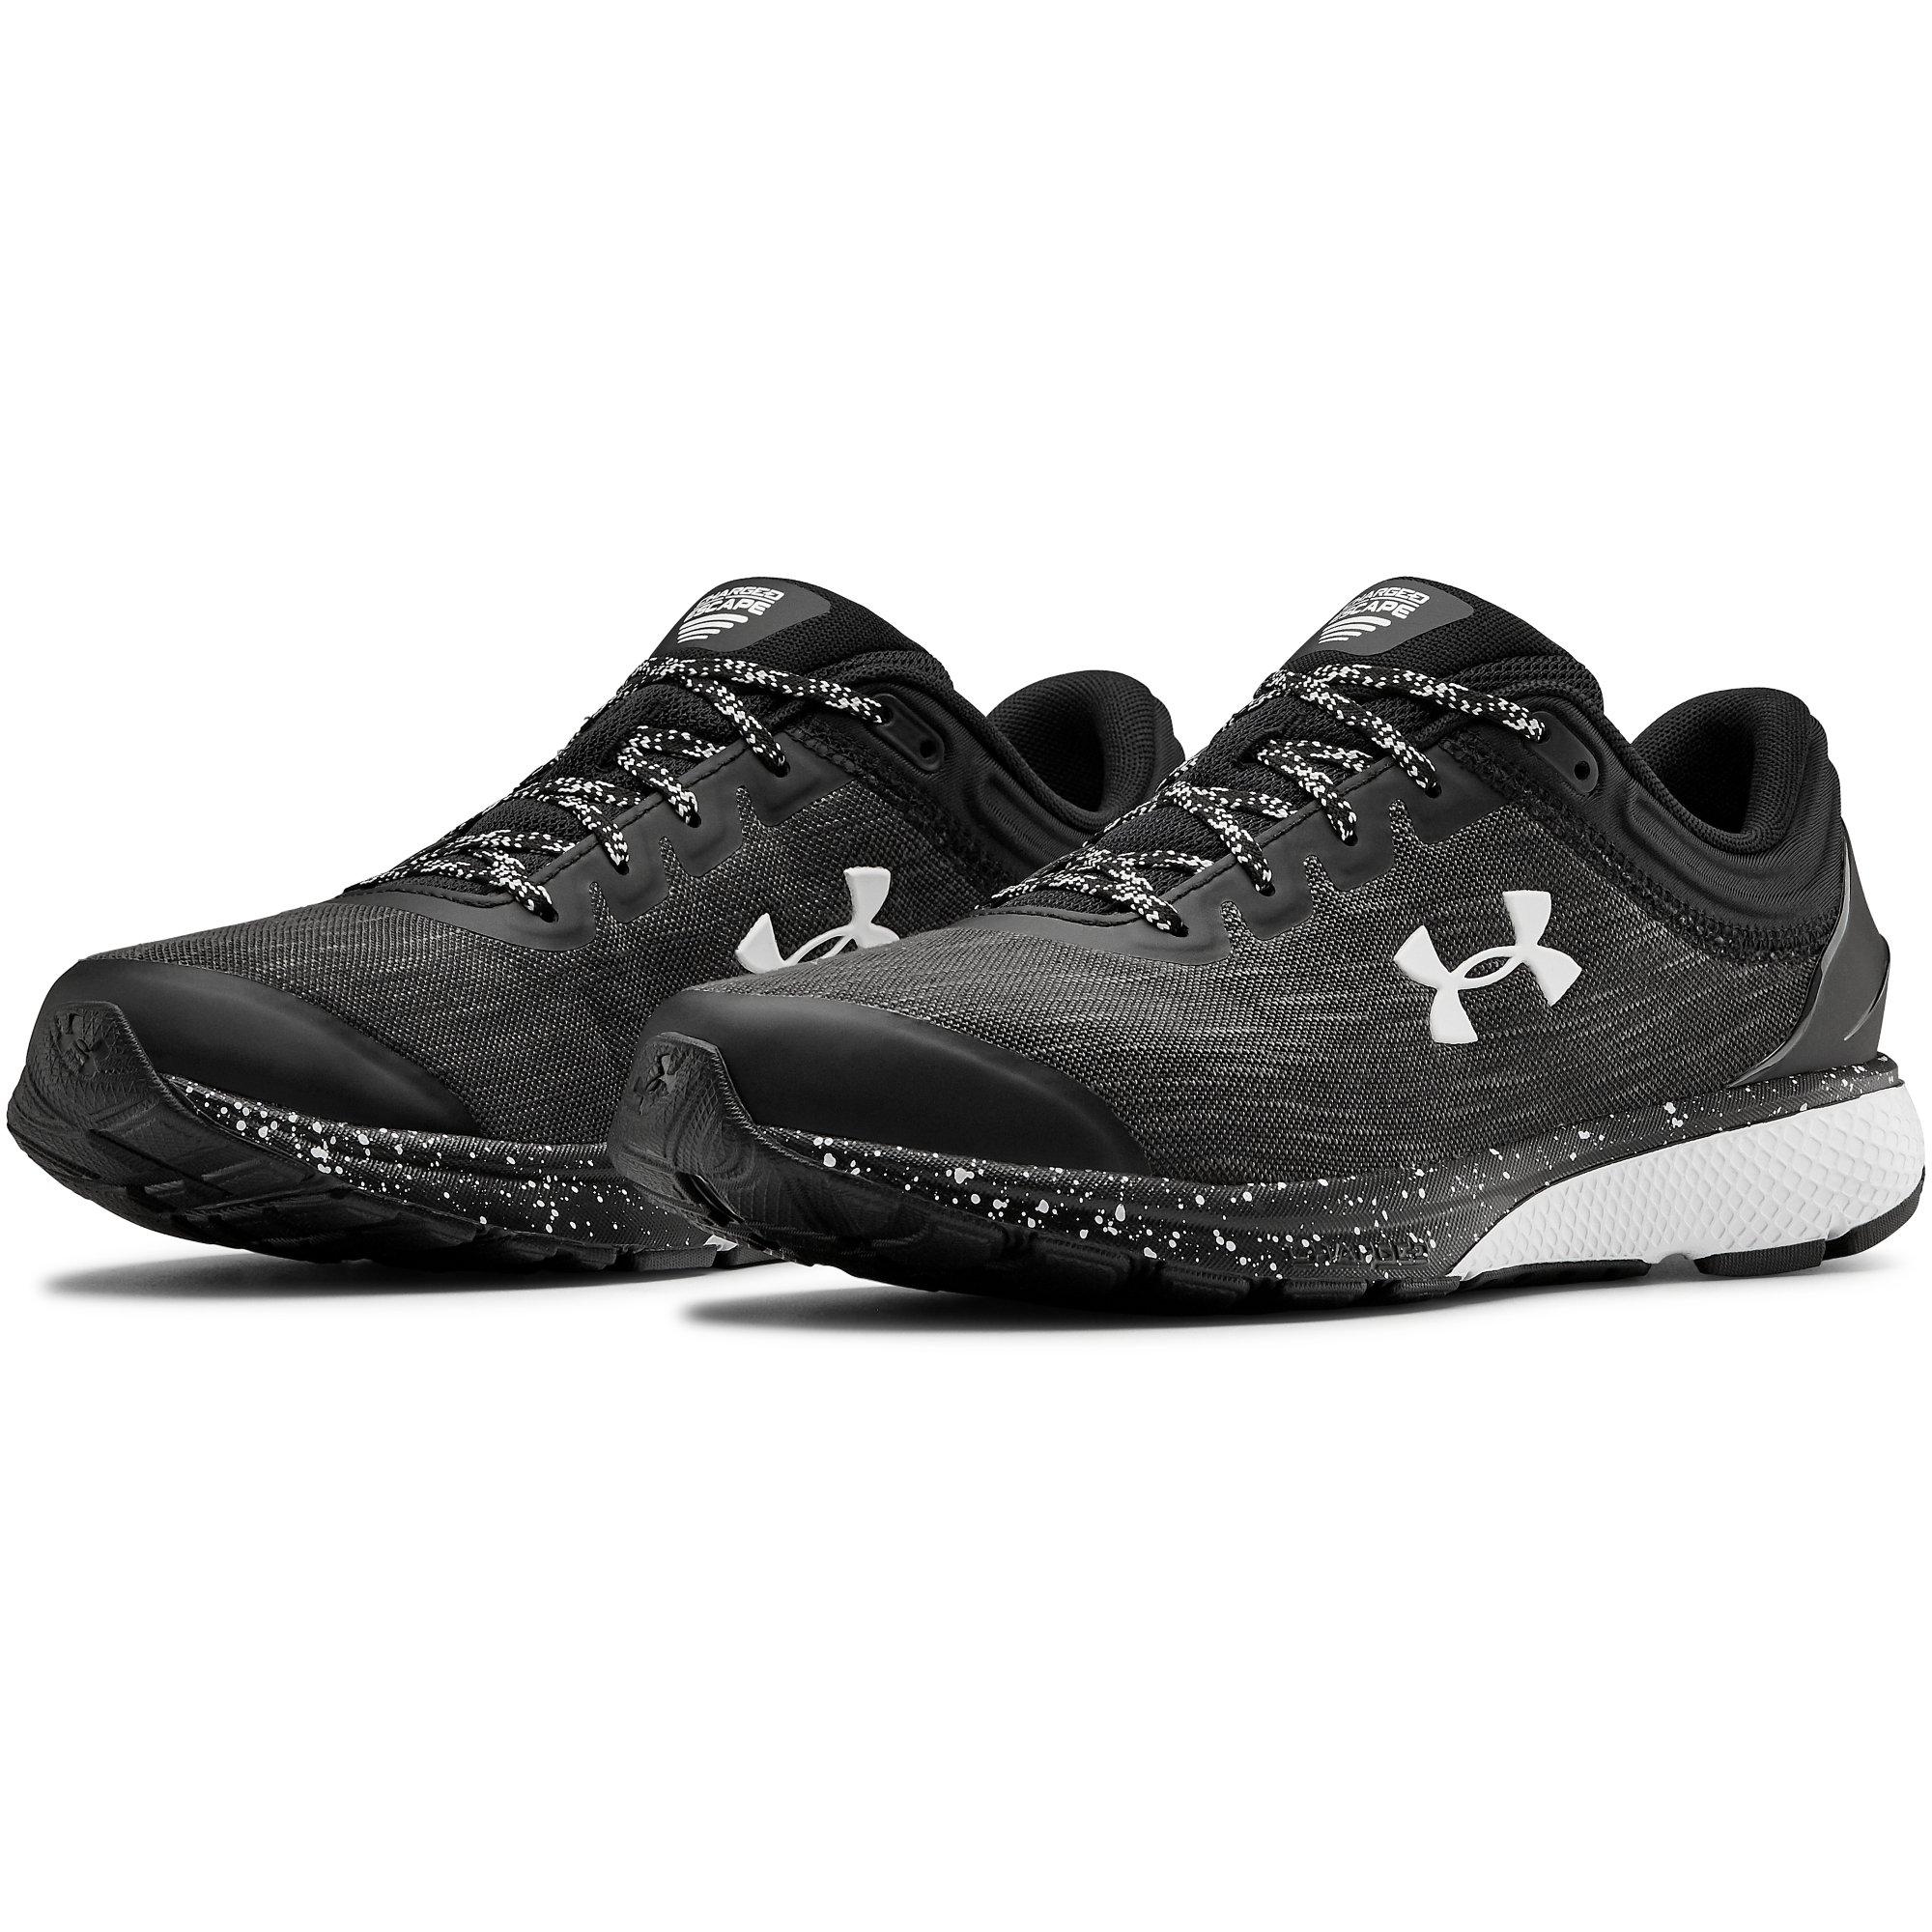 Under Armour Mens Charged Escape 2 Running Shoes Trainers Sneakers Sport 